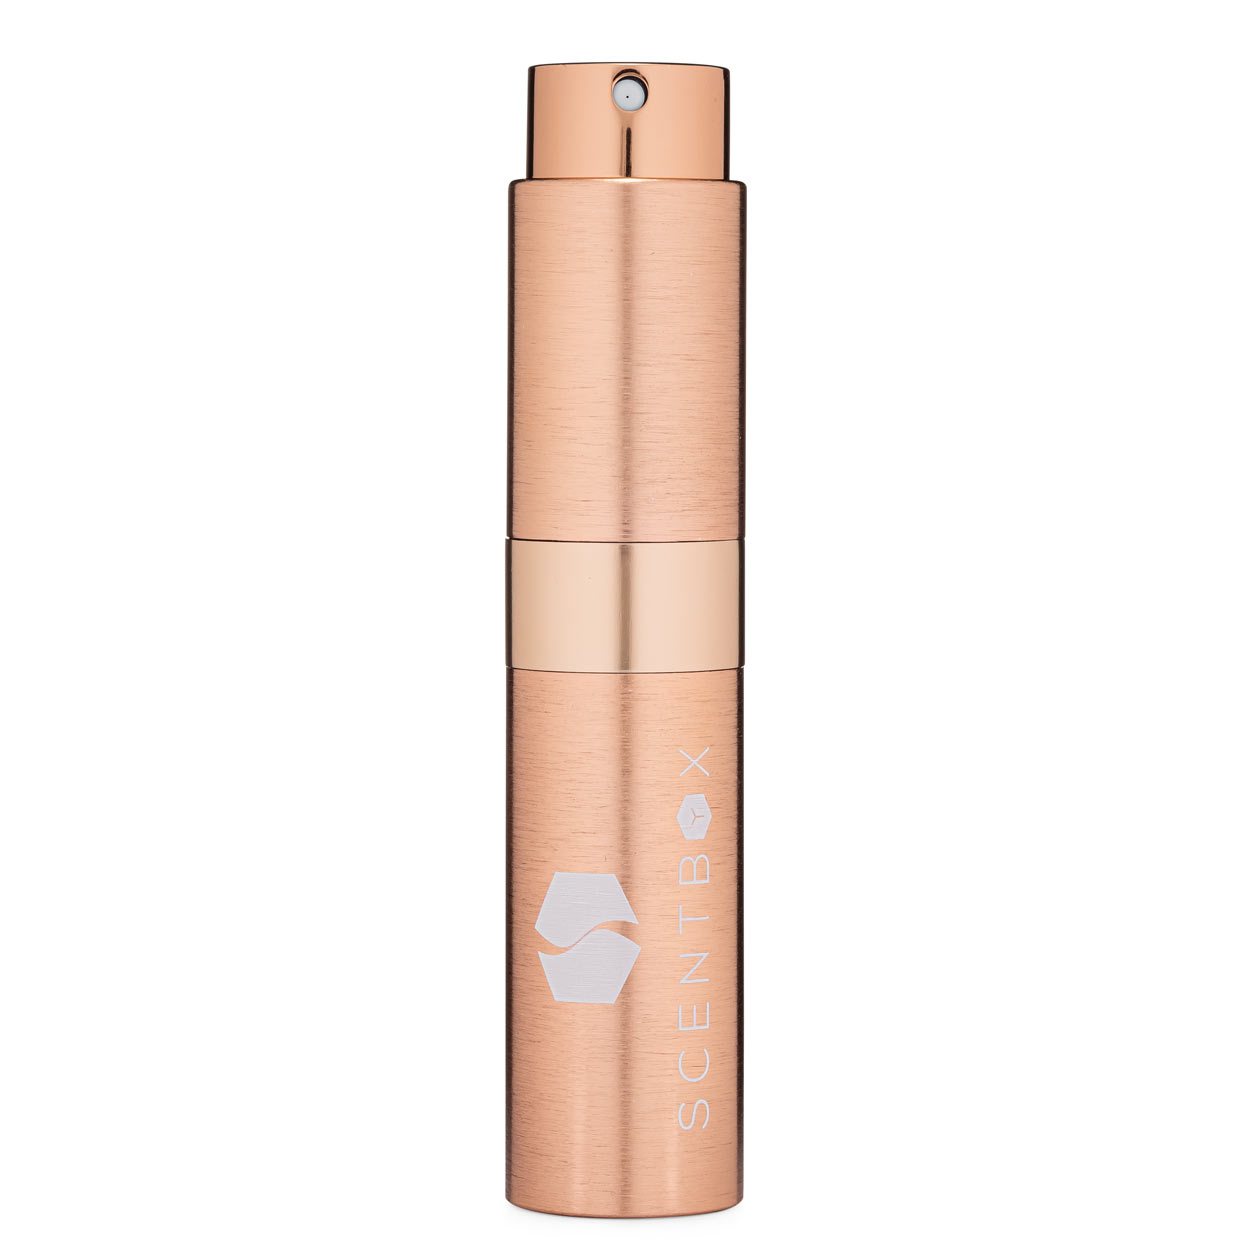 Brushed Peach Atomizer Case Scent Box Image